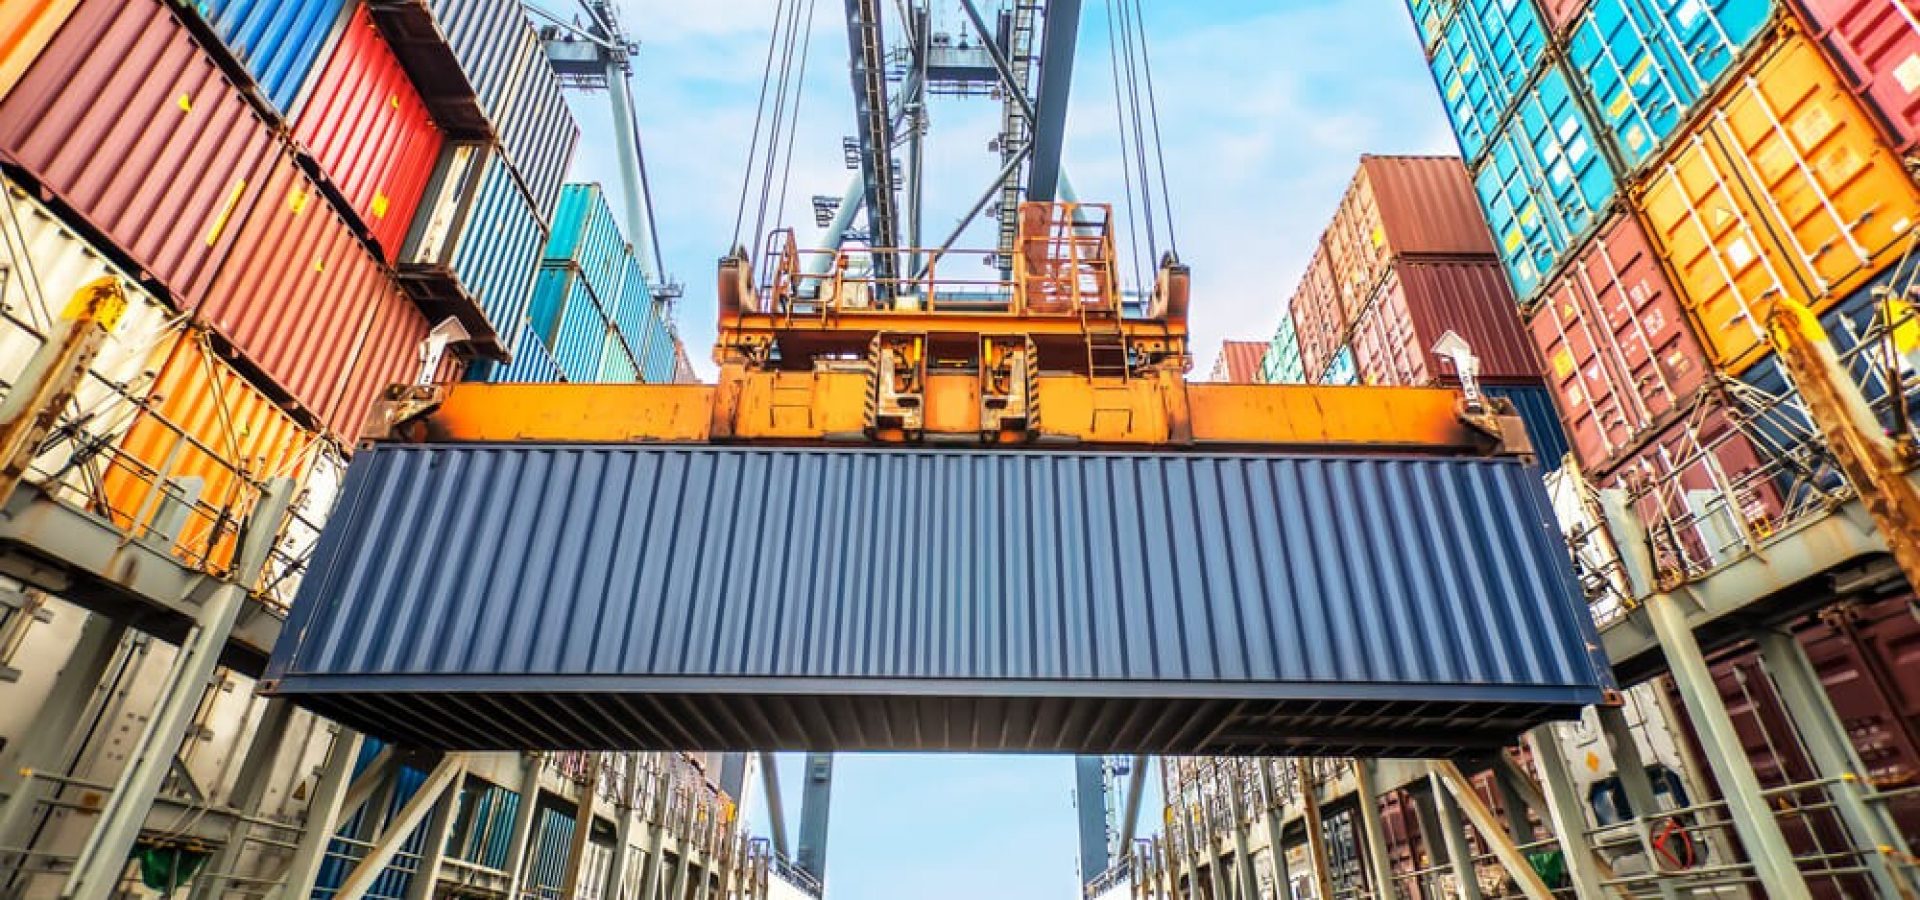 Wibest Broker — Shipping: Container loading in a Cargo freight ship wit industrial crane.